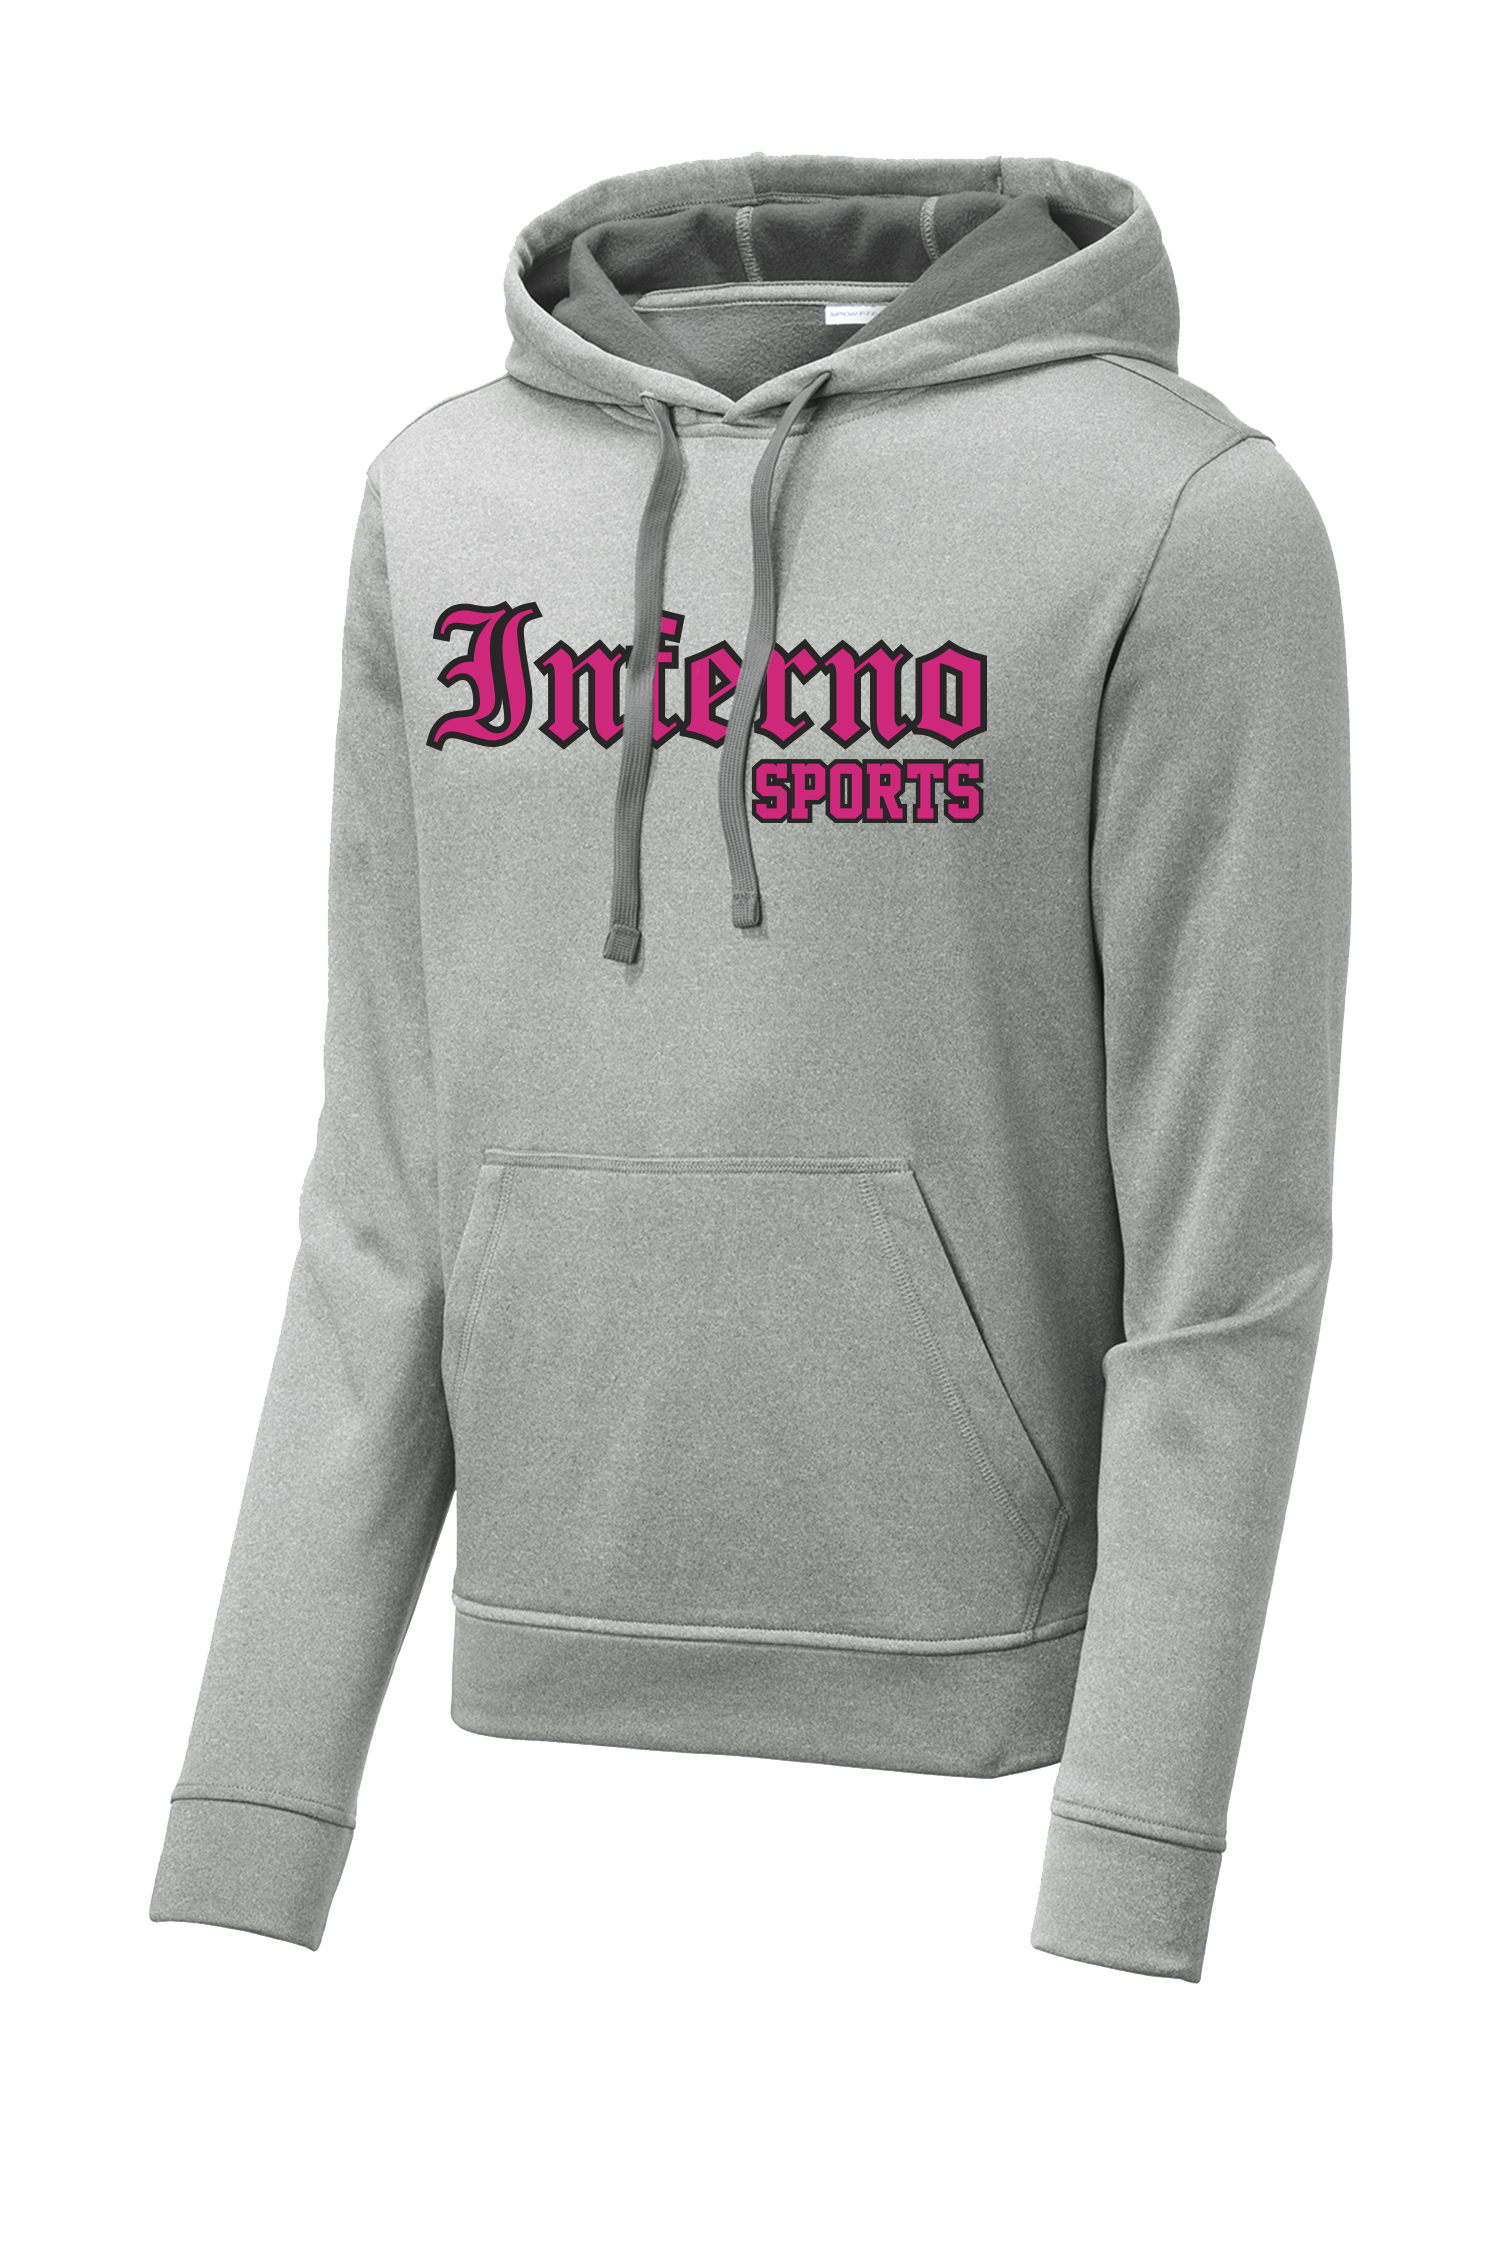 Inferno Sports Heather Fleece Hooded Pullover - Pink/Black